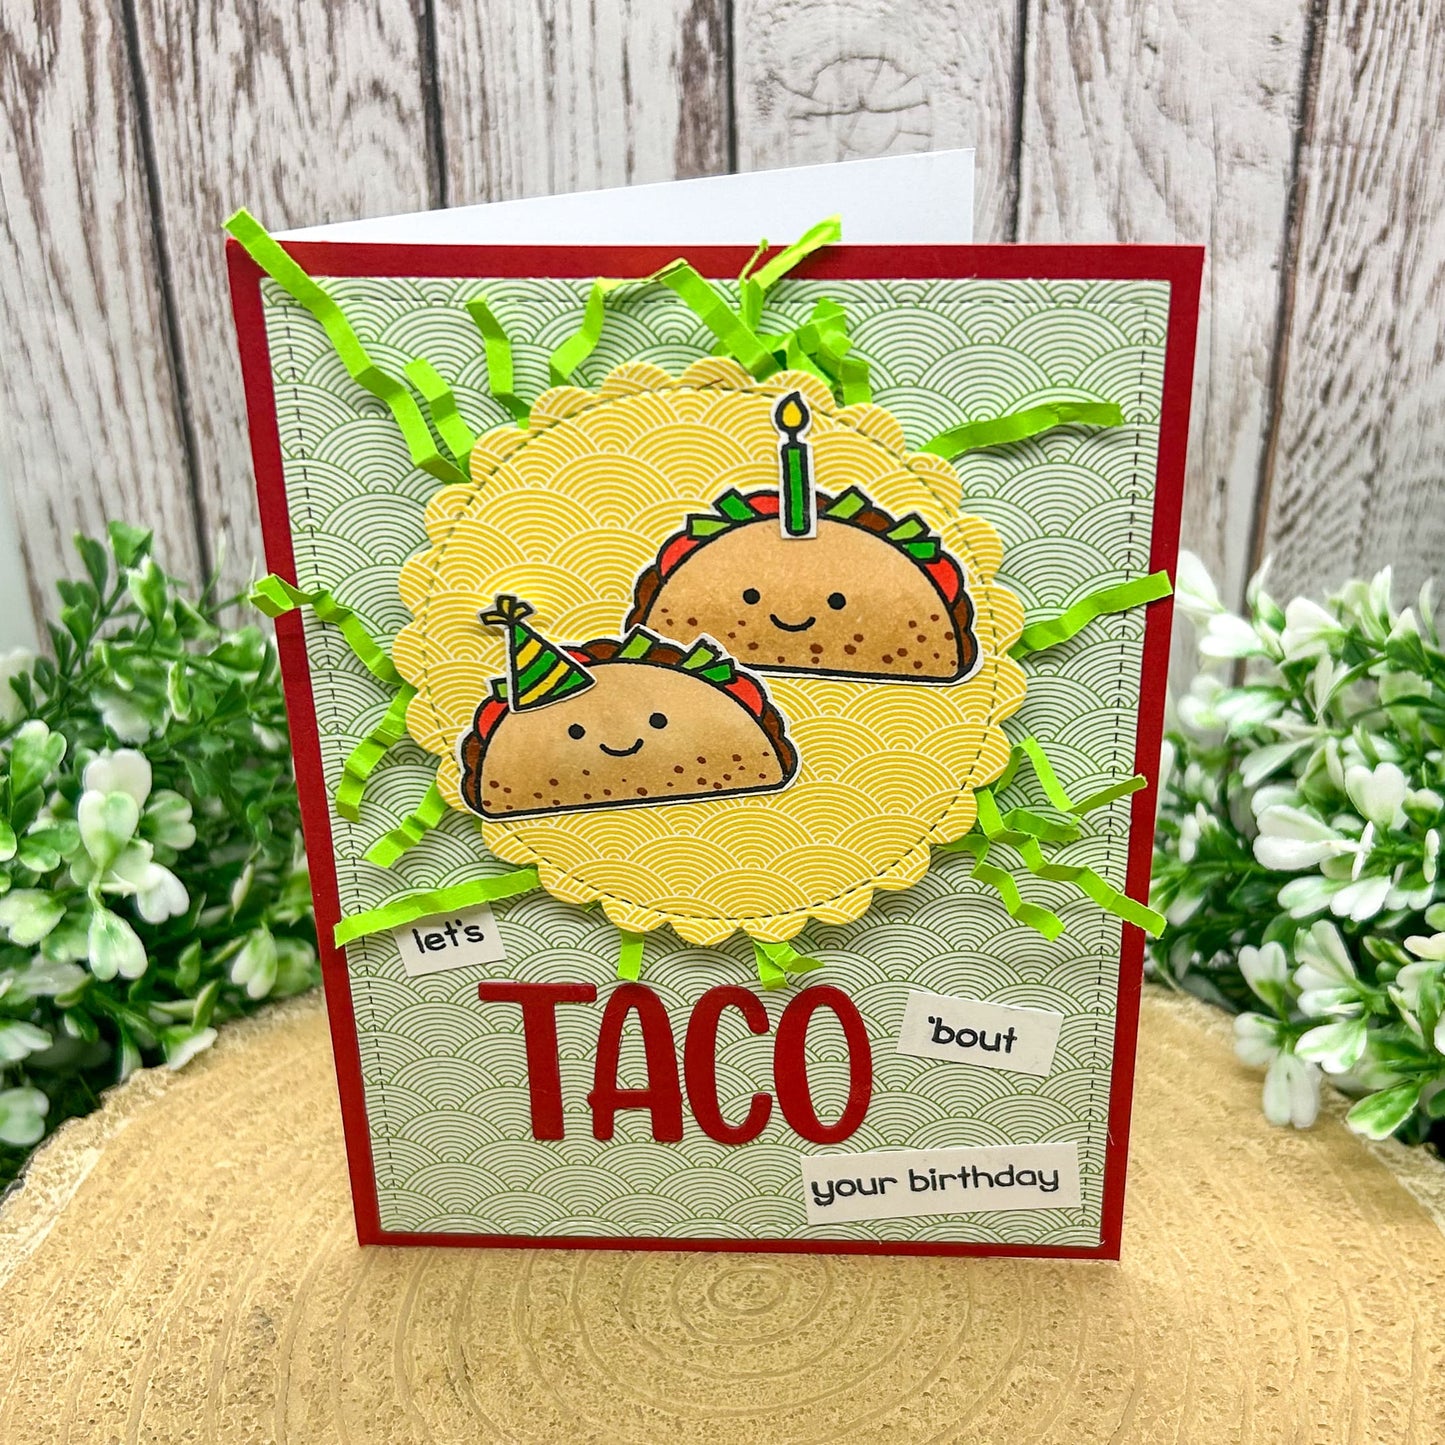 Let's Taco 'bout Funny Handmade Birthday Card-1